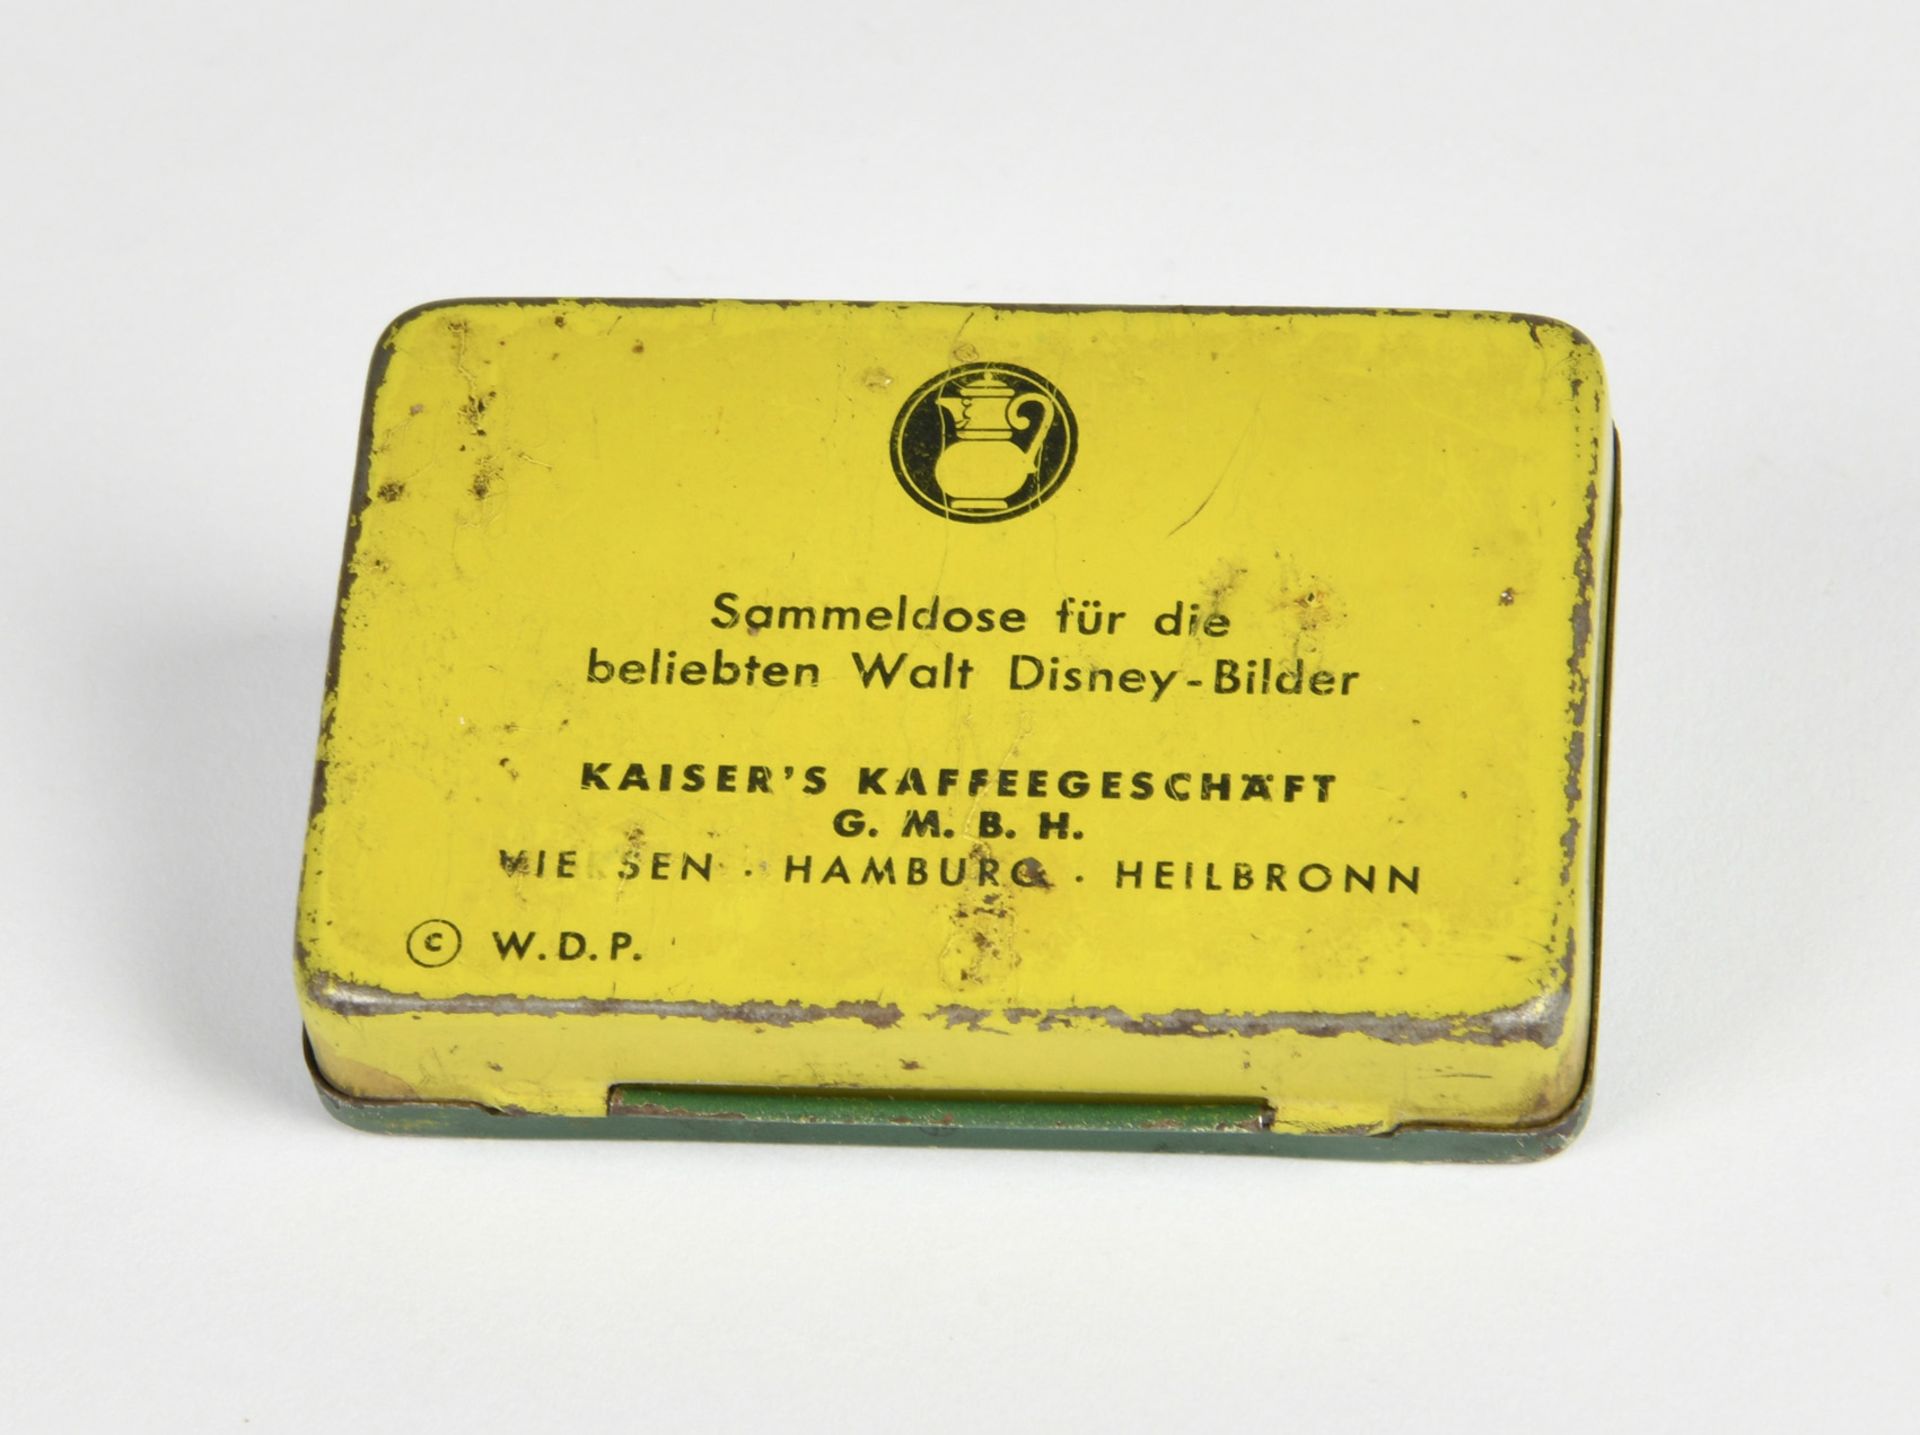 Kaisers Kaffee,collection box for Walt Disney pictures, 7 x 5 cm, paint d., C 2- - Image 4 of 4